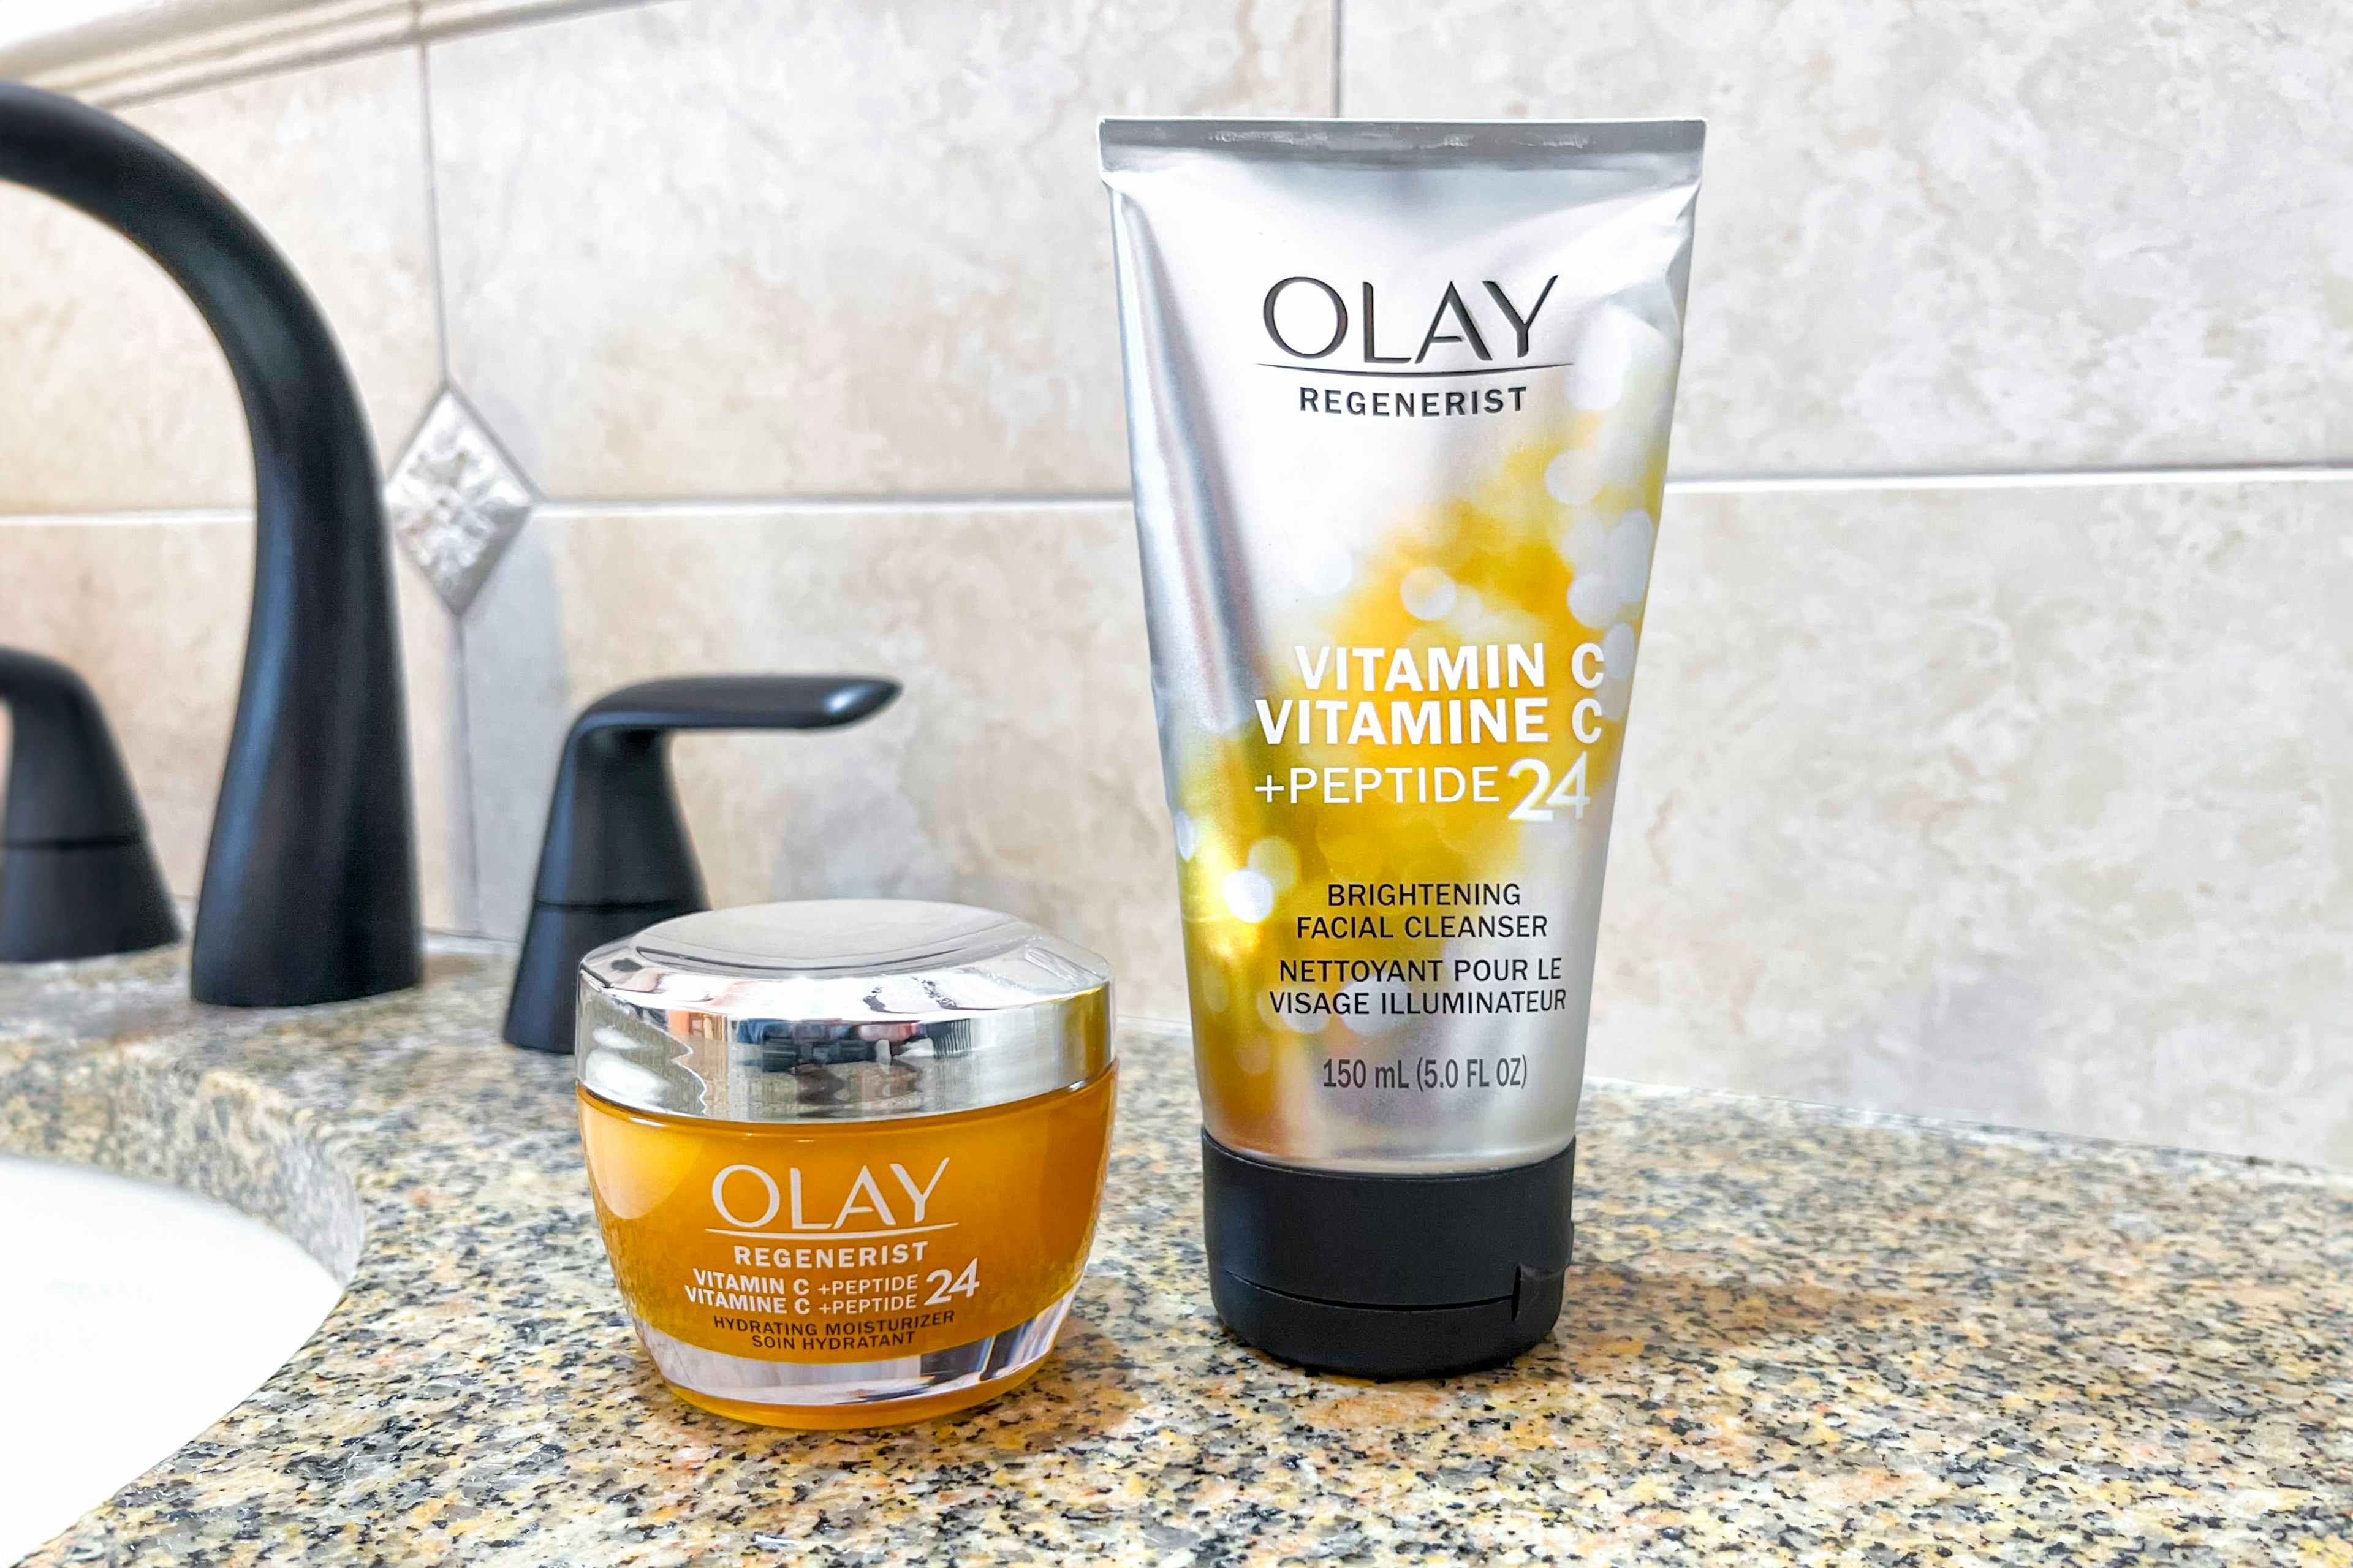 Olay vitamin C peptide on a counter